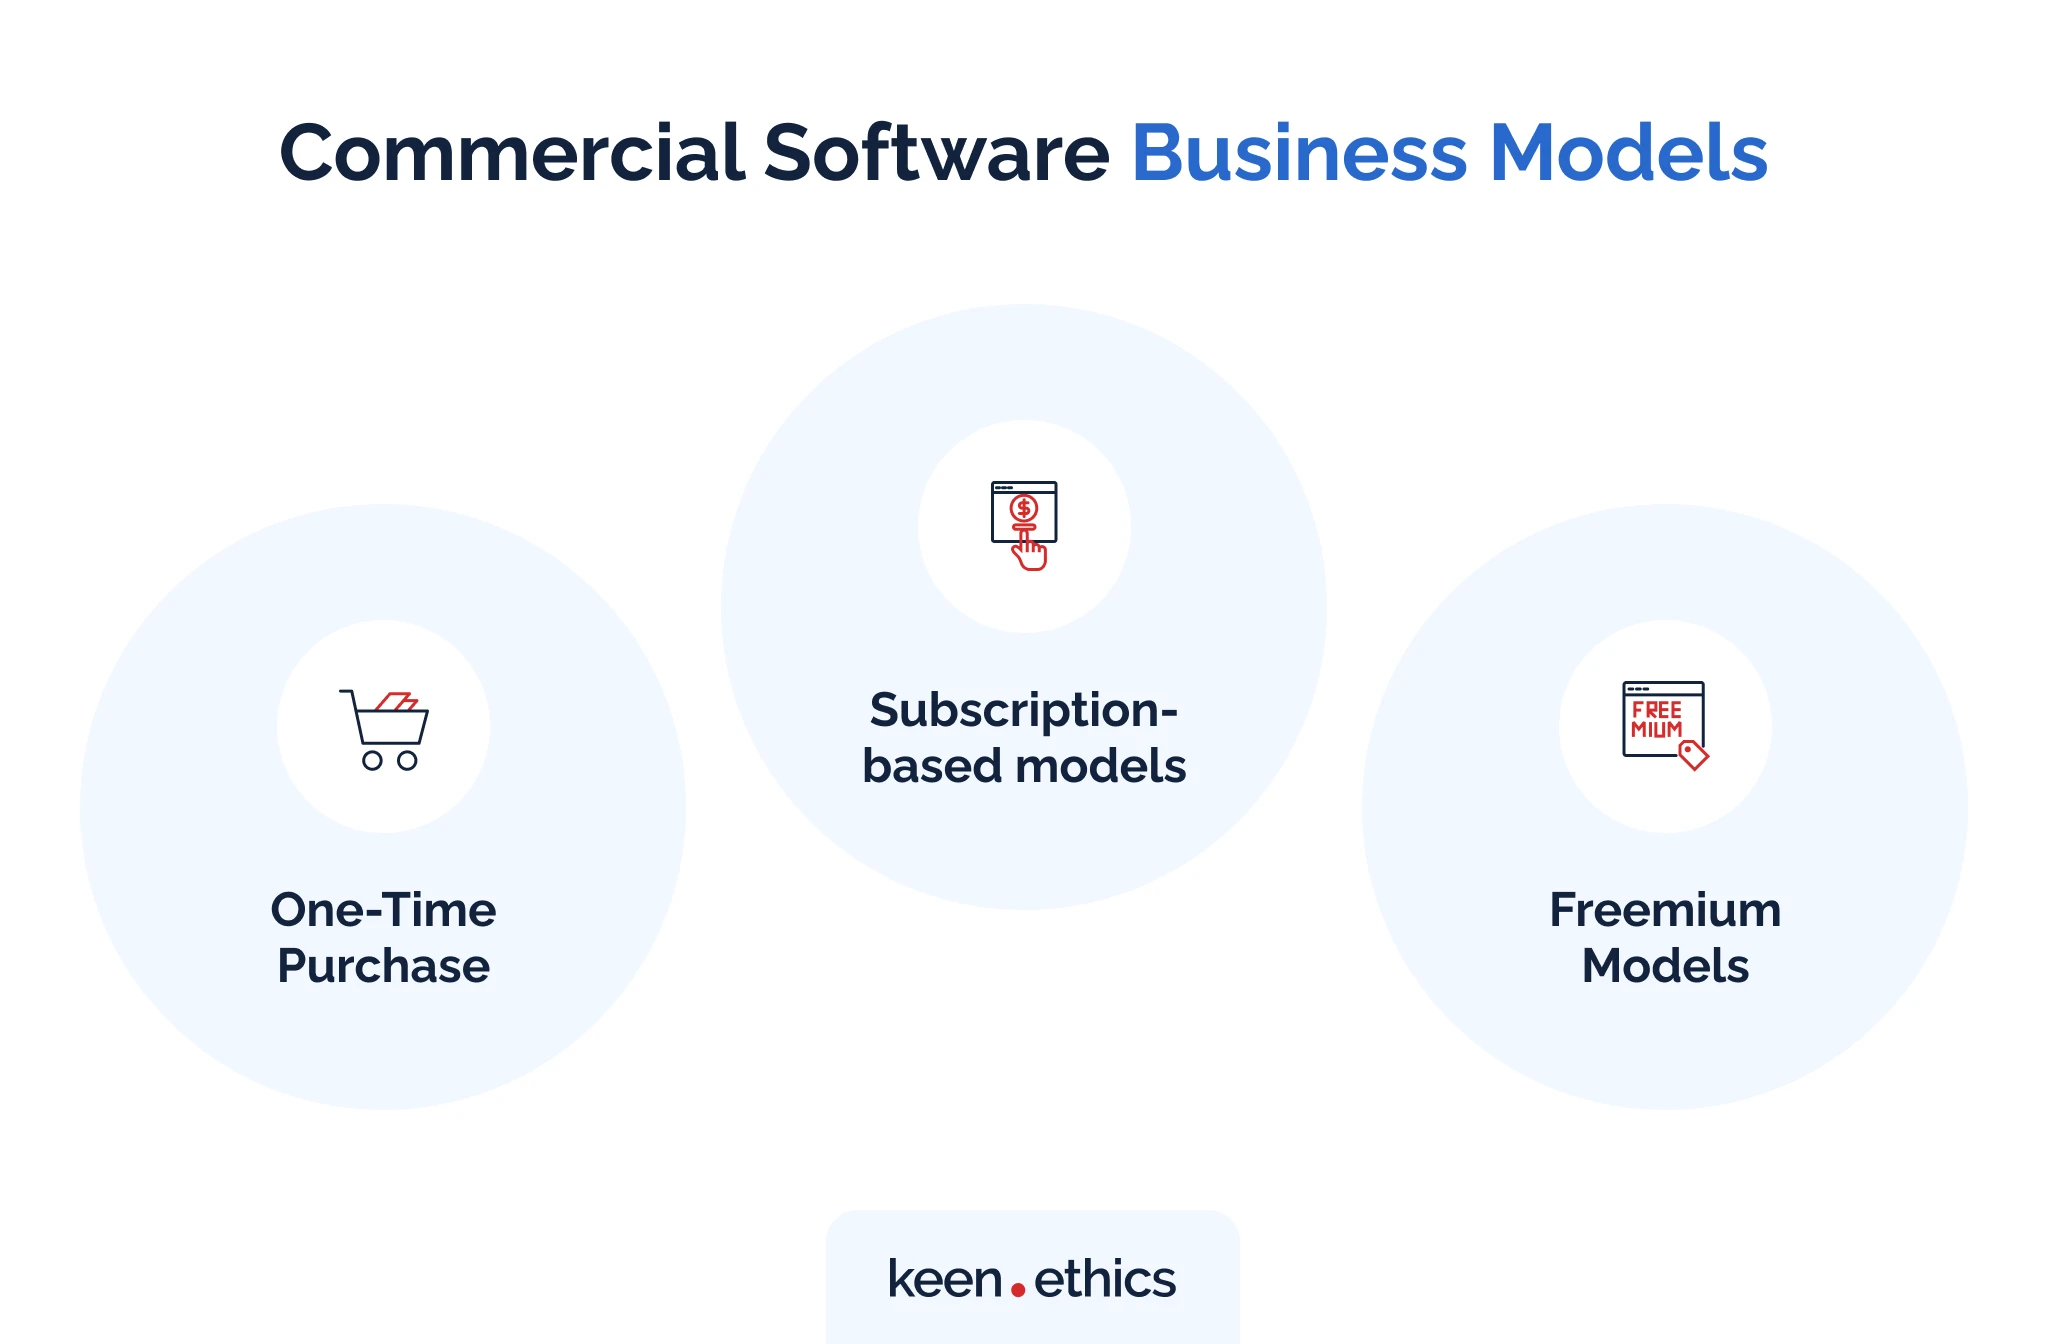 Commercial software business models